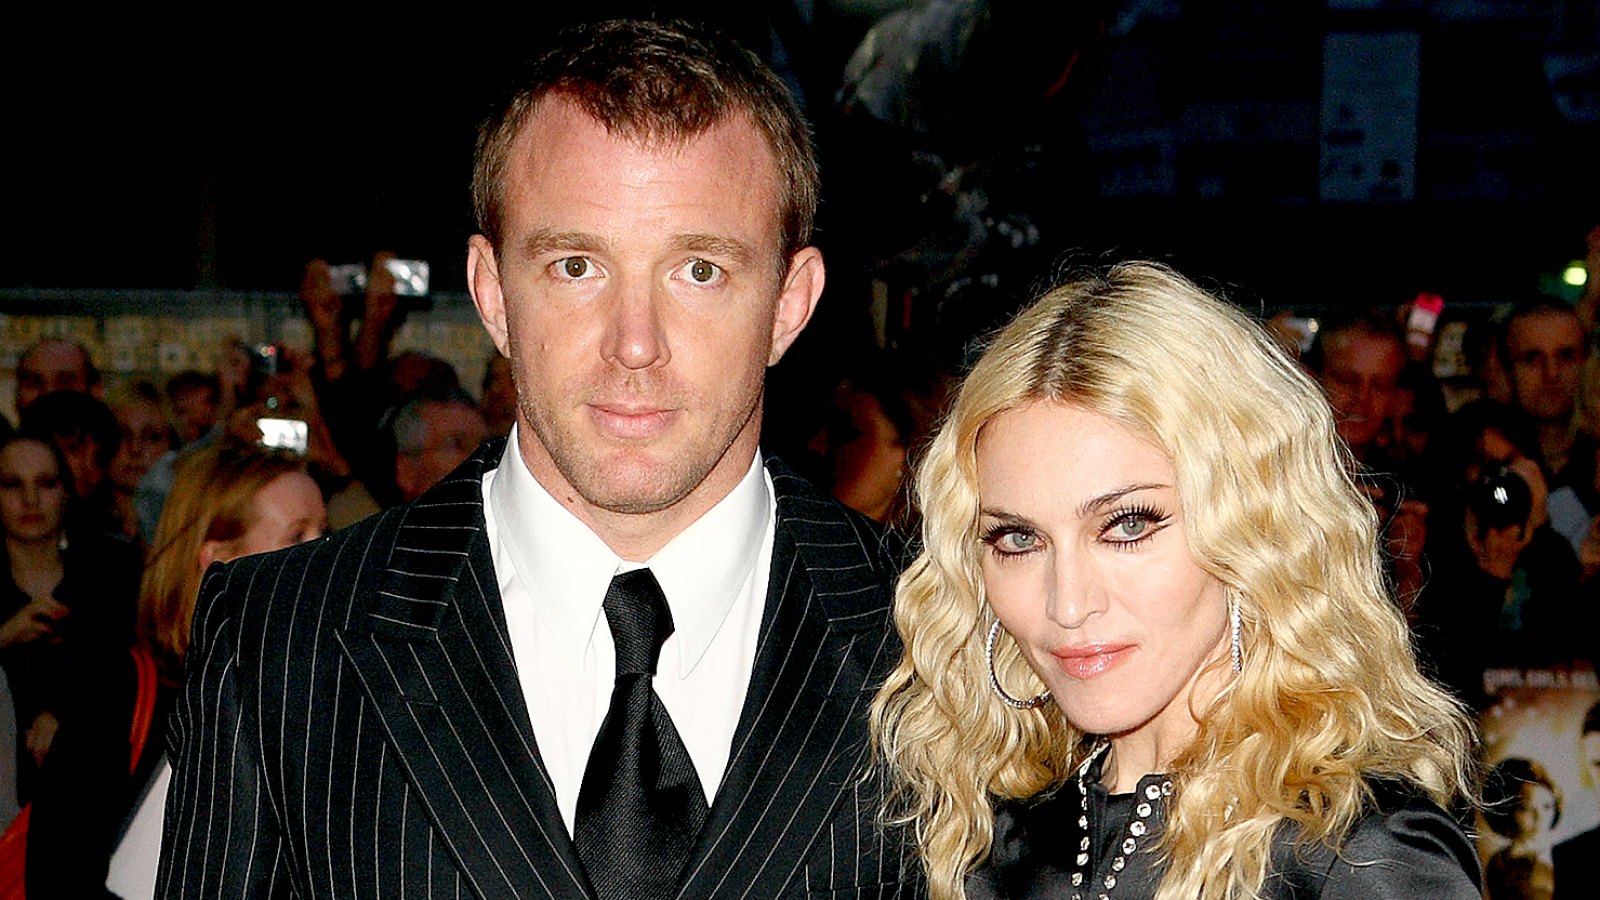 Guy Ritchie and Madonna arrive at the World Premiere of 'RocknRolla' at the Odeon West End on September 1, 2008.